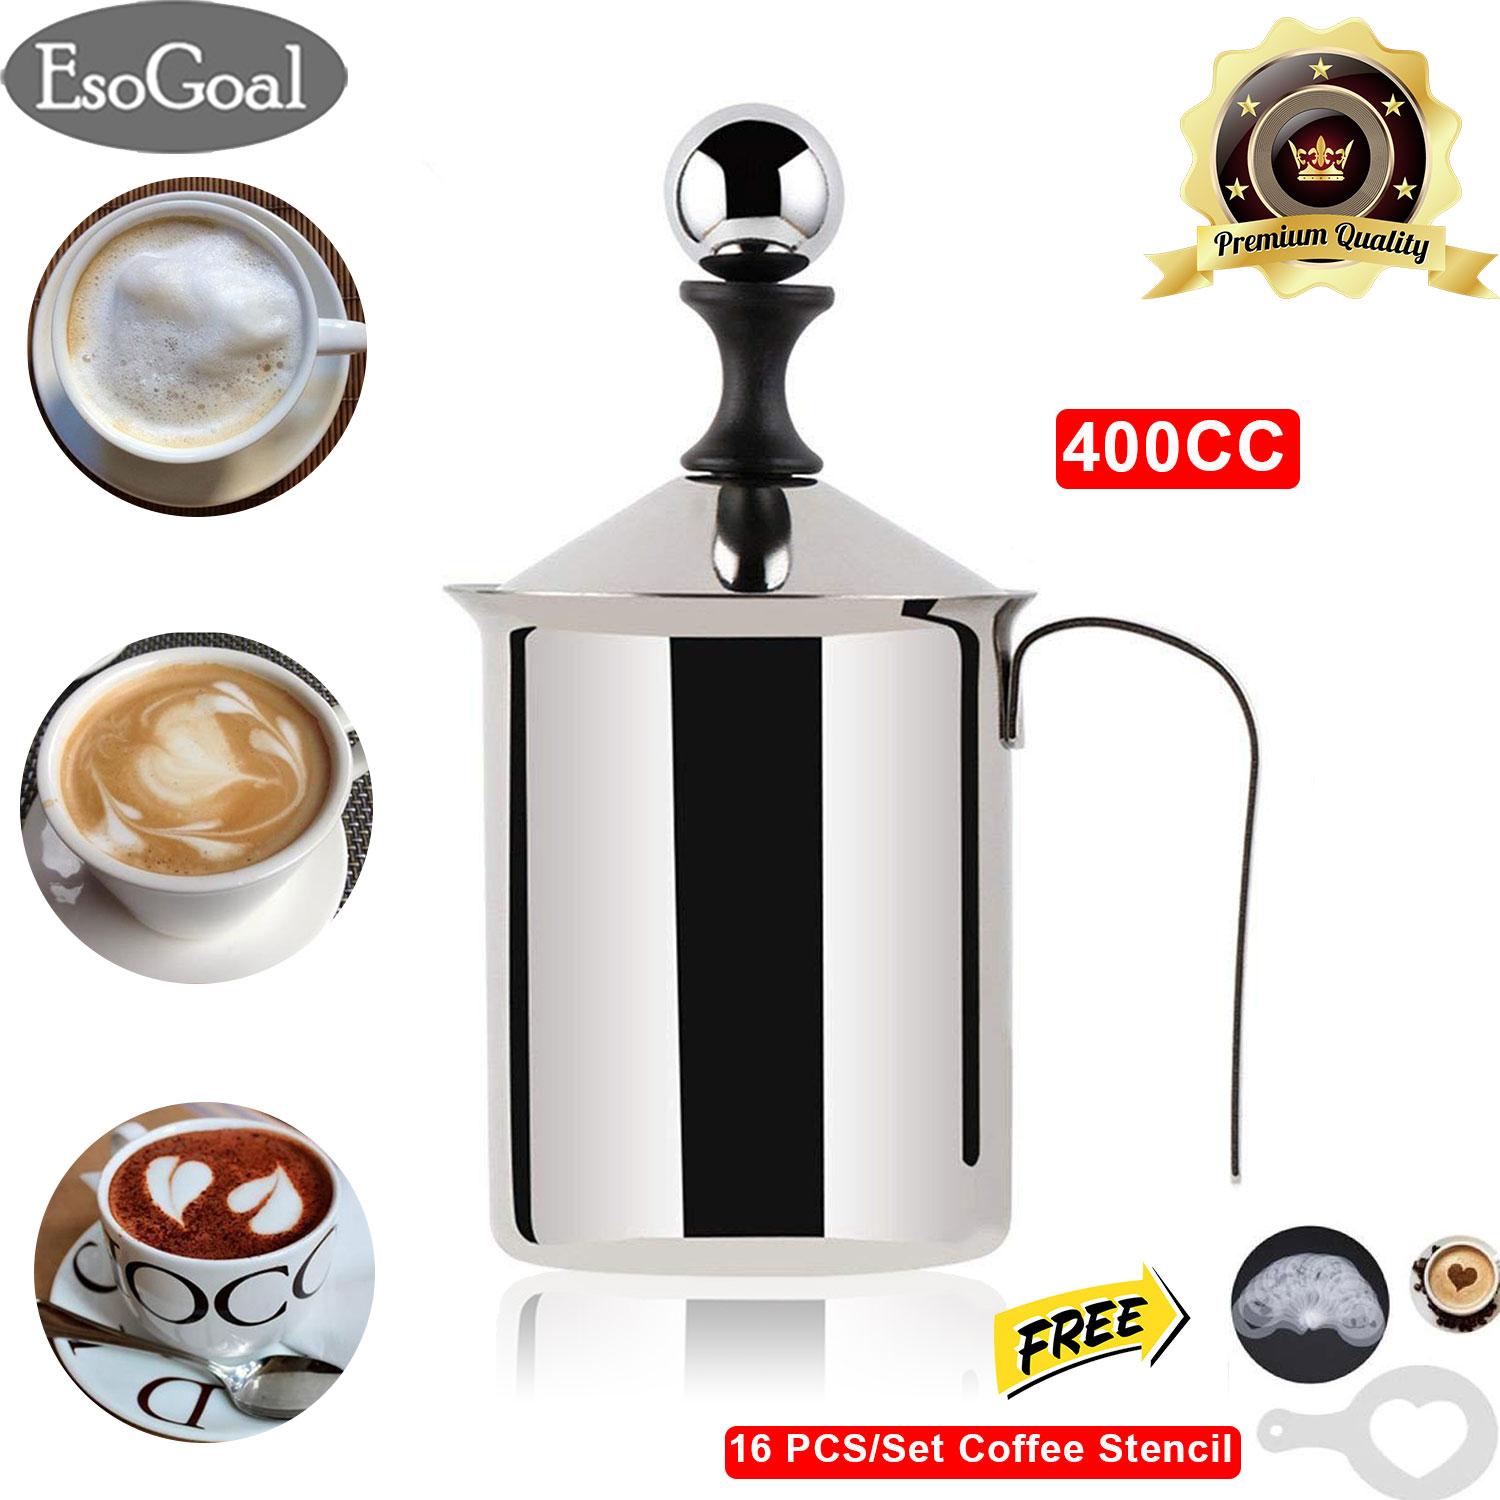 EsoGoal ถ้วยปั๊มฟองนม ขนาด  ถ้วยตีฟองนม เครื่องทำฟองนม ที่ตีฟองนม Manual Milk Frother Foamer Stainless Steel Cappuccino Coffee Creamer Foam Pitcher with Handle and Lid Double Mesh 400CC/800CC